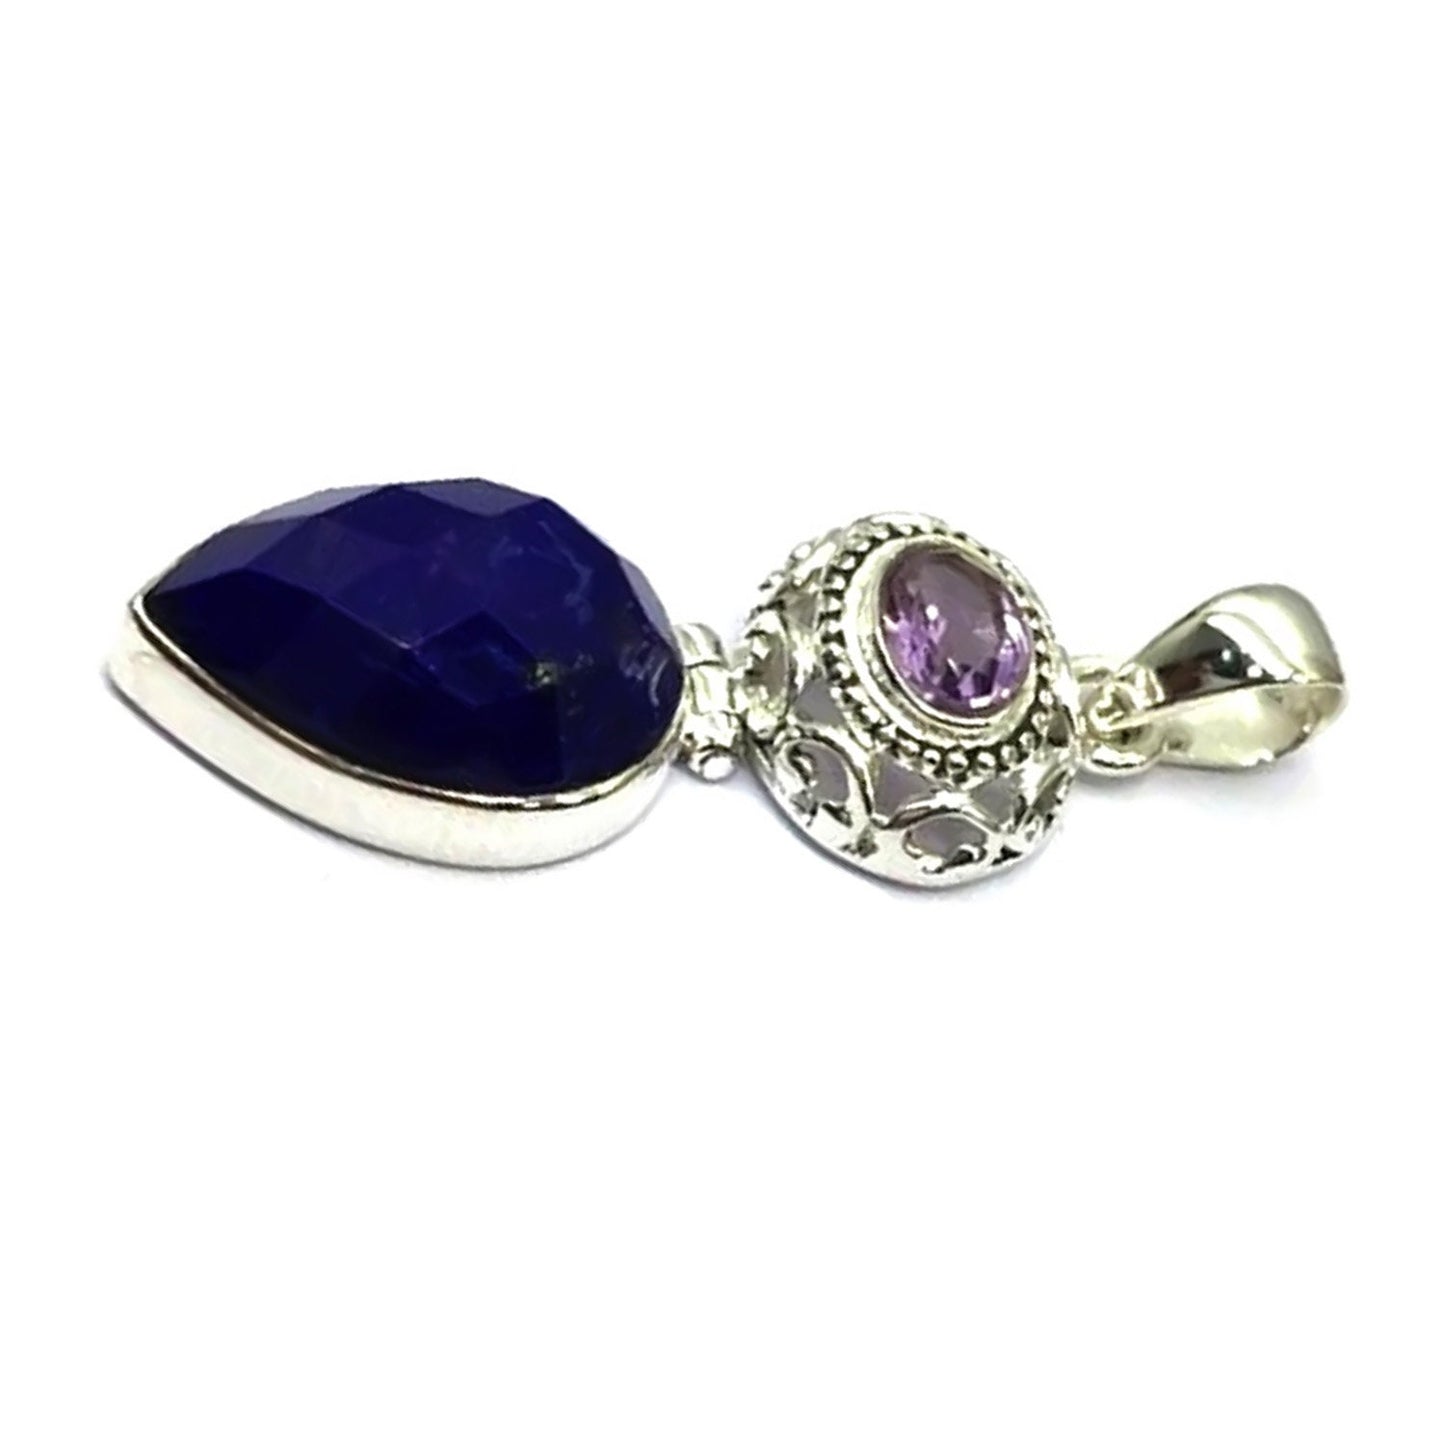 Natural Lapis Lazuli With Amethyst Gemstone Pendant 925 Sterling Silver Pendant, Boho Pendant With 18" Chain Fine Jewelry Gift For Her